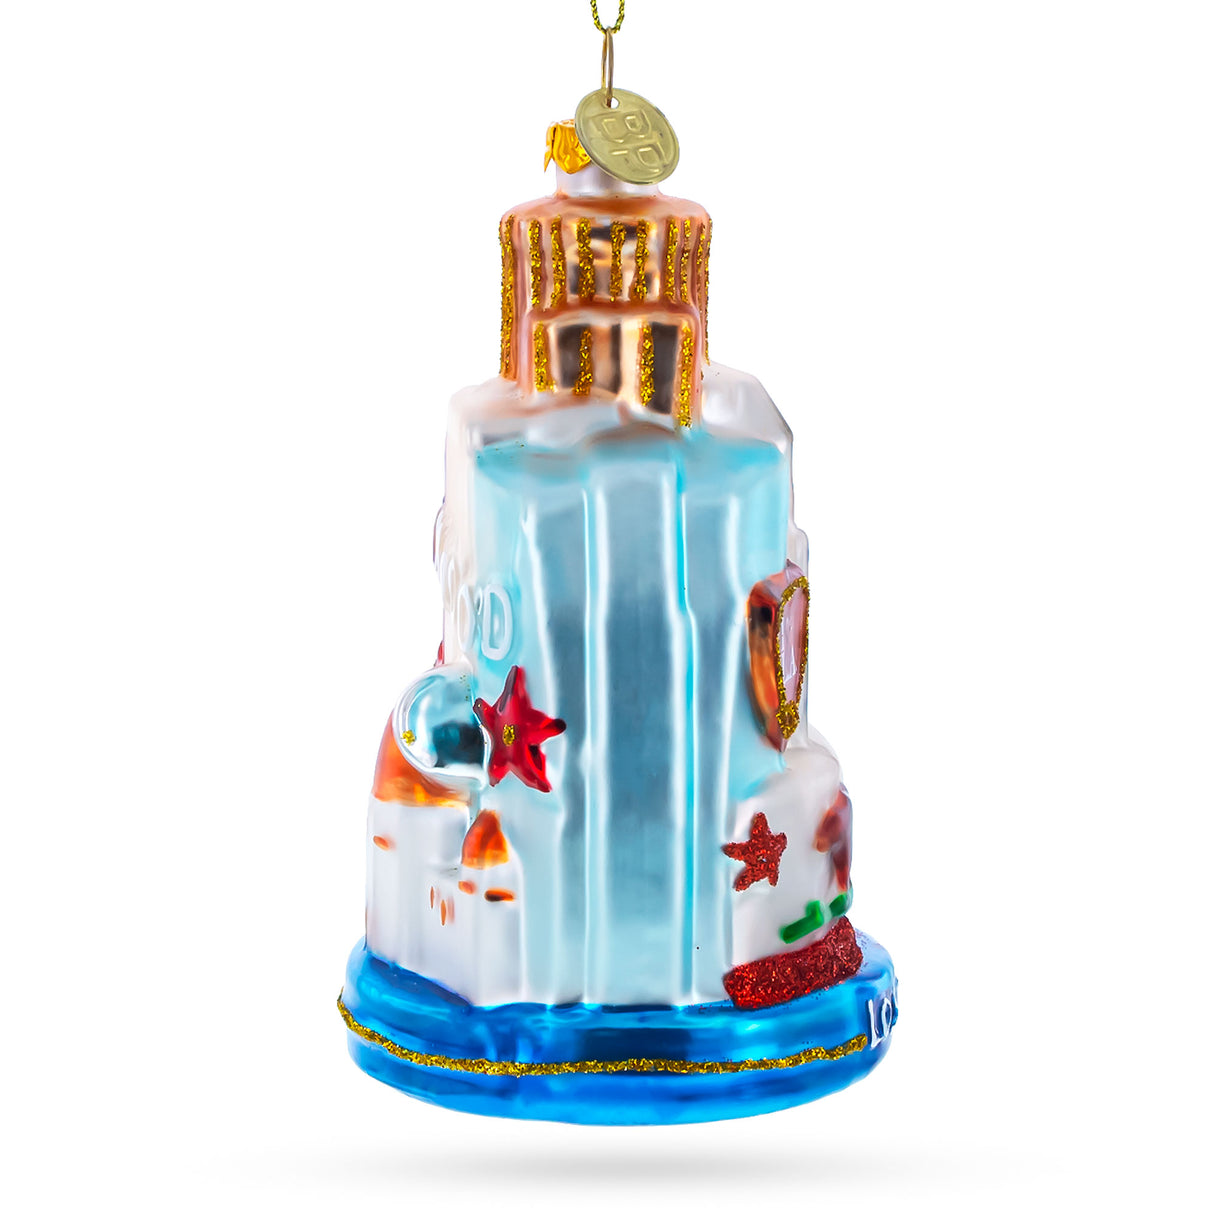 Los Angeles Attractions - Blown Glass Christmas Ornament ,dimensions in inches: 3.8 x 2.7 x 3